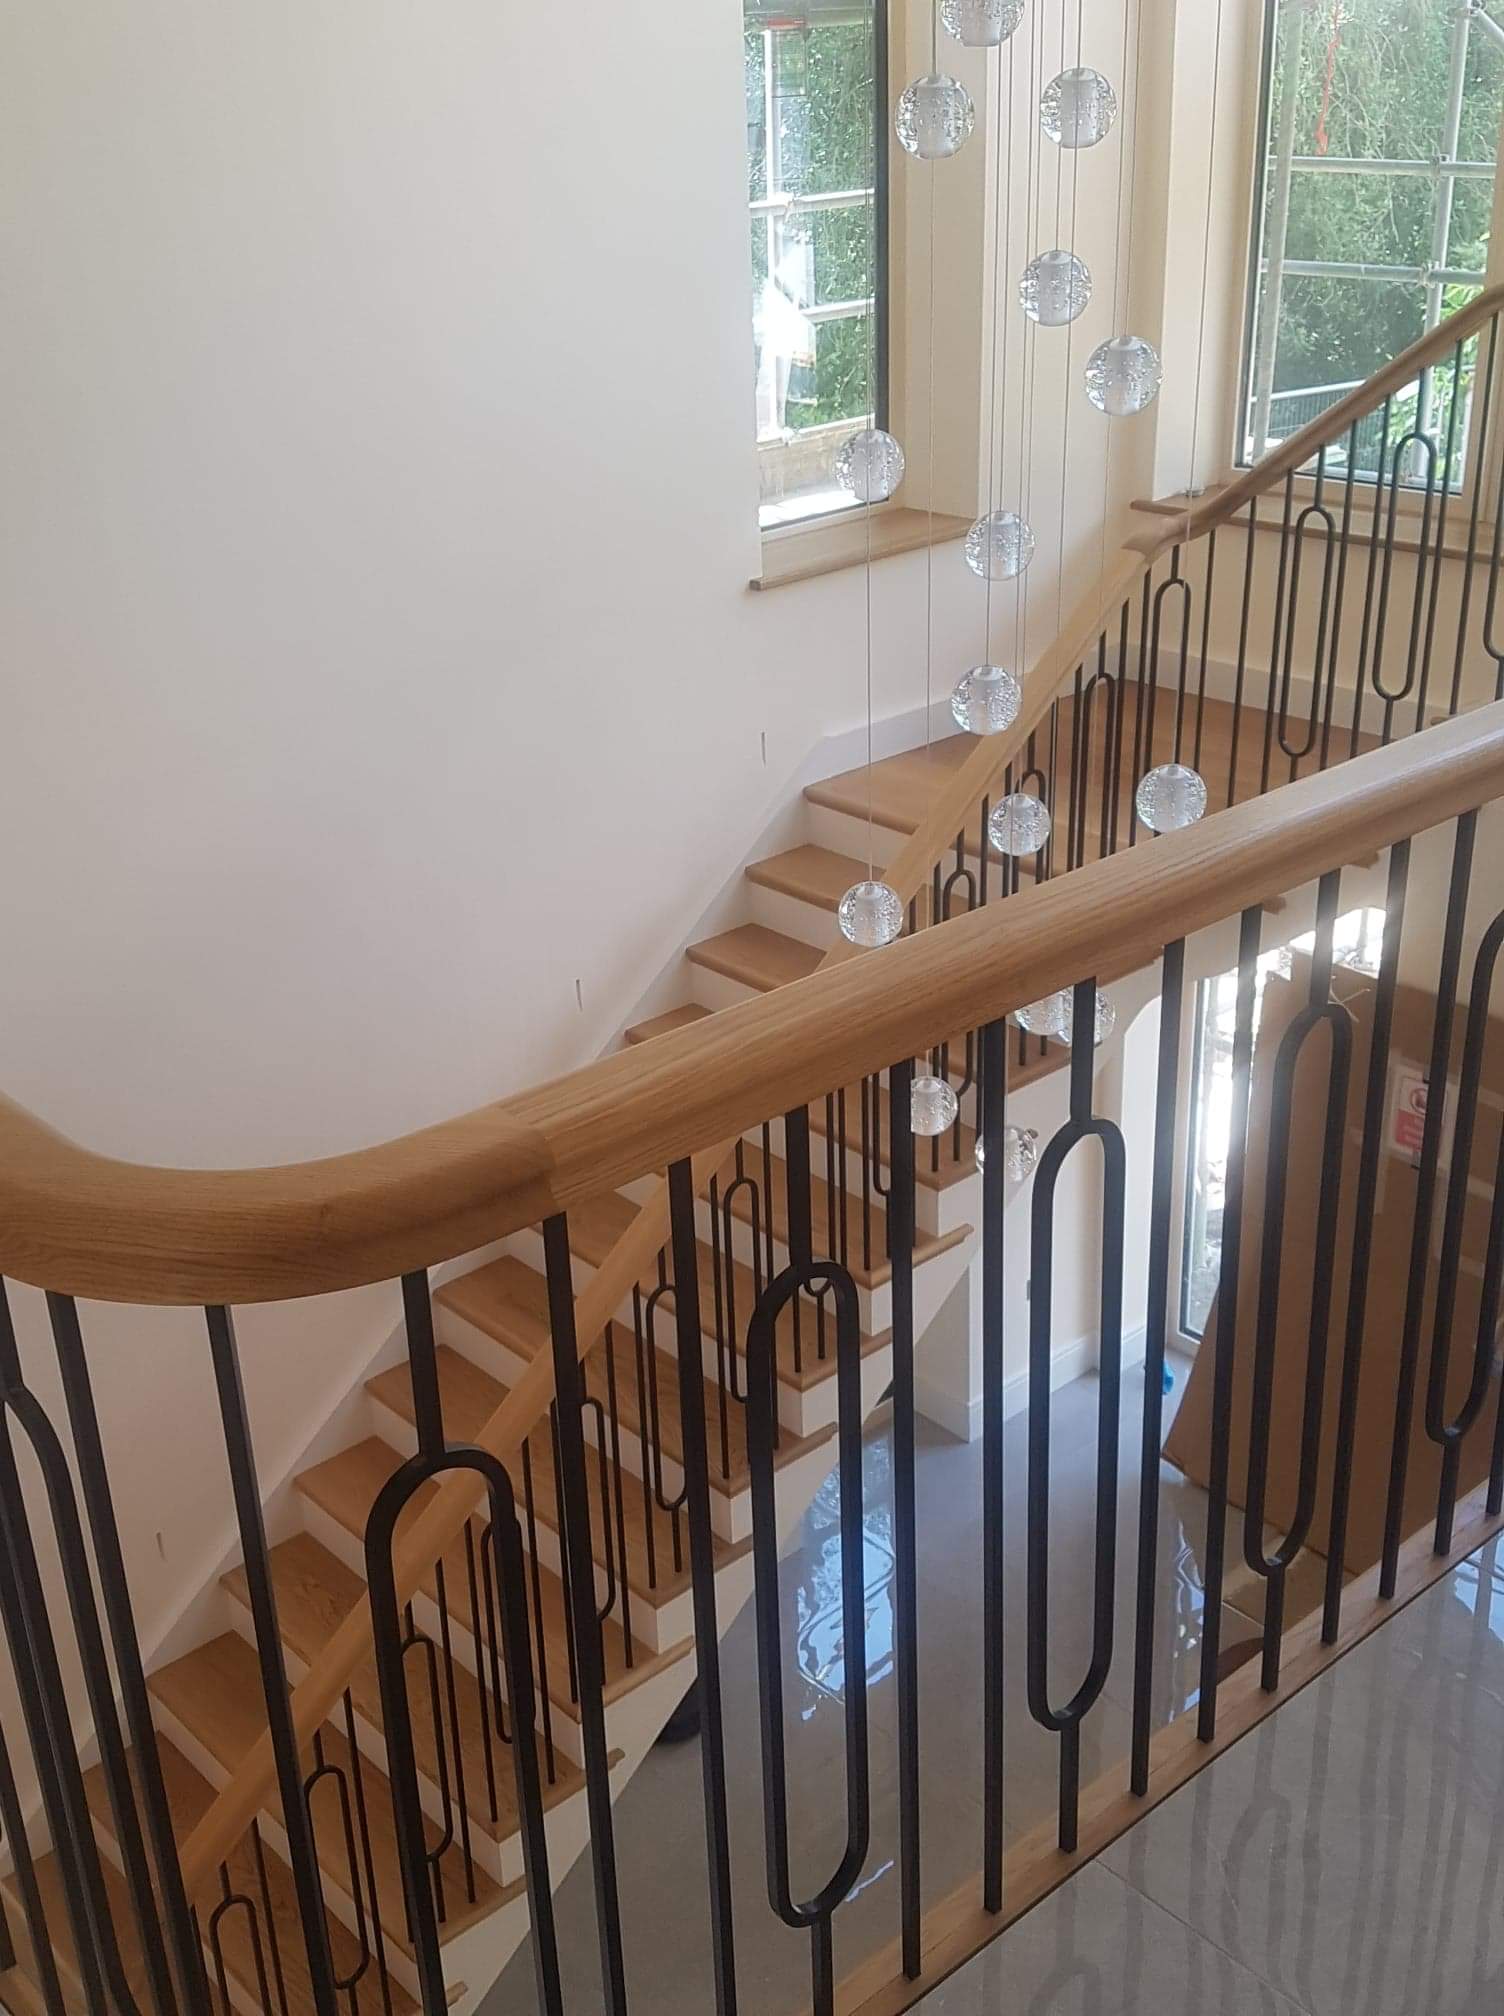 Oak staircase new build and iron spindles, chandelier, hallway